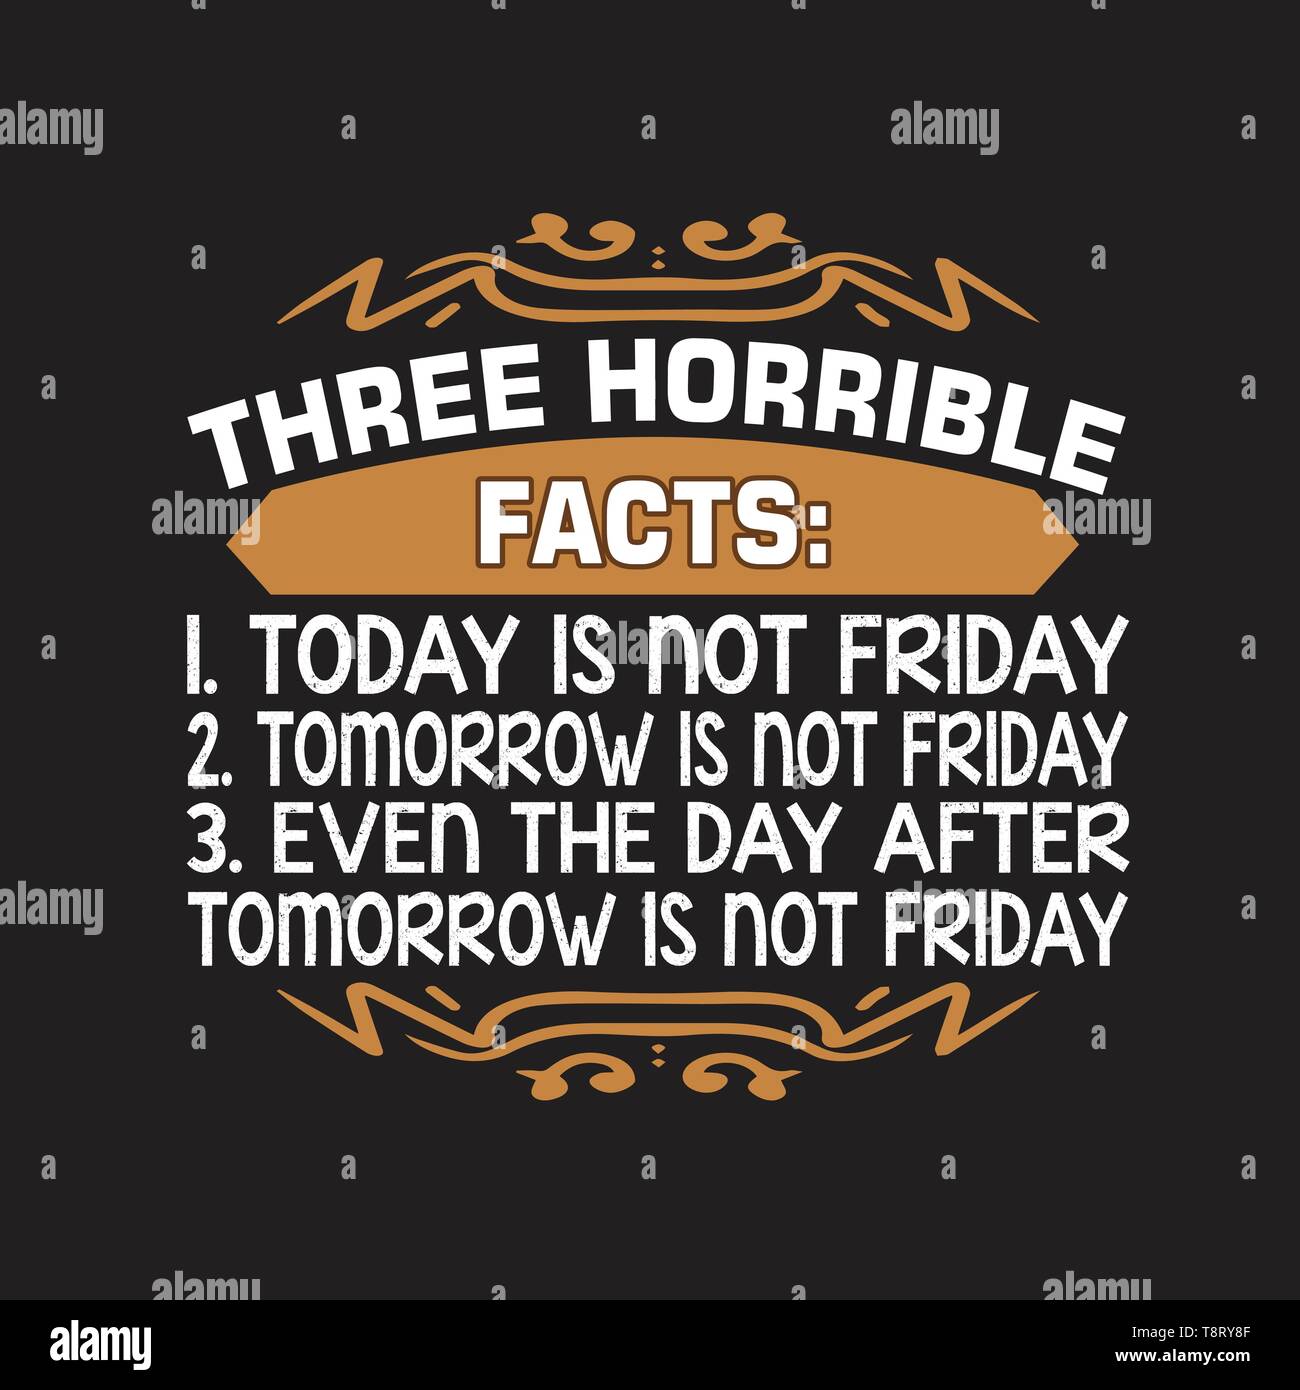 Funny Work Quote. There horrible facts, tomorrow is not friday Stock Vector  Image & Art - Alamy